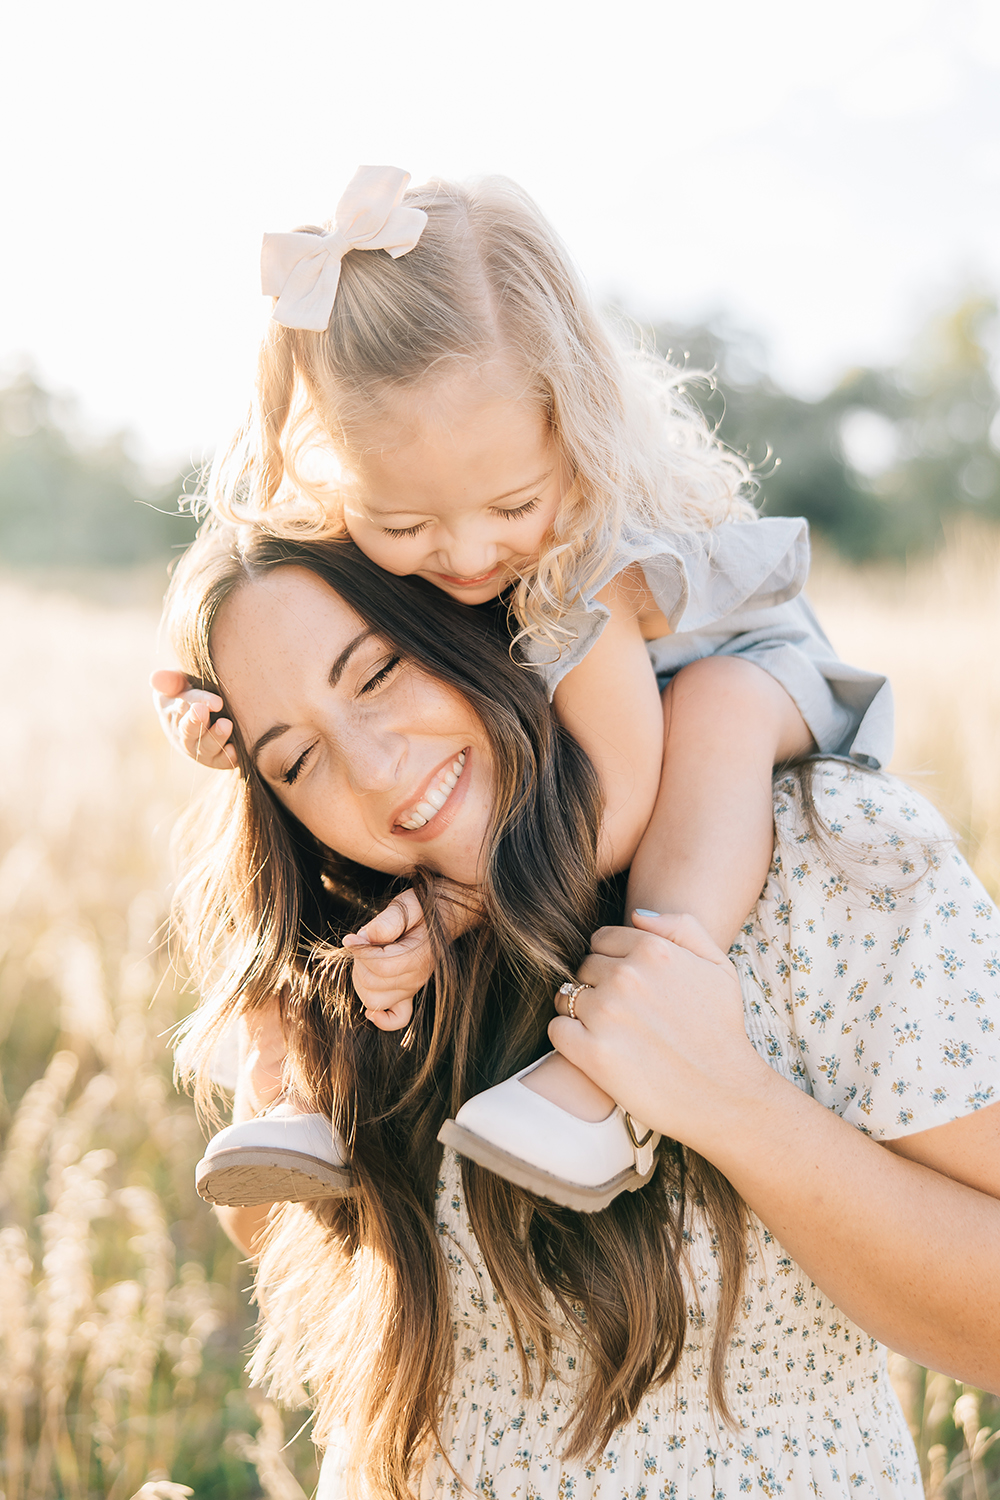 Mother and daughter's relationship in beautiful filtered light and coordinating outfits for a picture-perfect moment and family photo win. Love relationship motherhood outdoors playful hug #outdoorfamilyphotography #Tennessefamilyphotographer #mississippifamilyphotographer #tipsforsummerfamilyphotos
